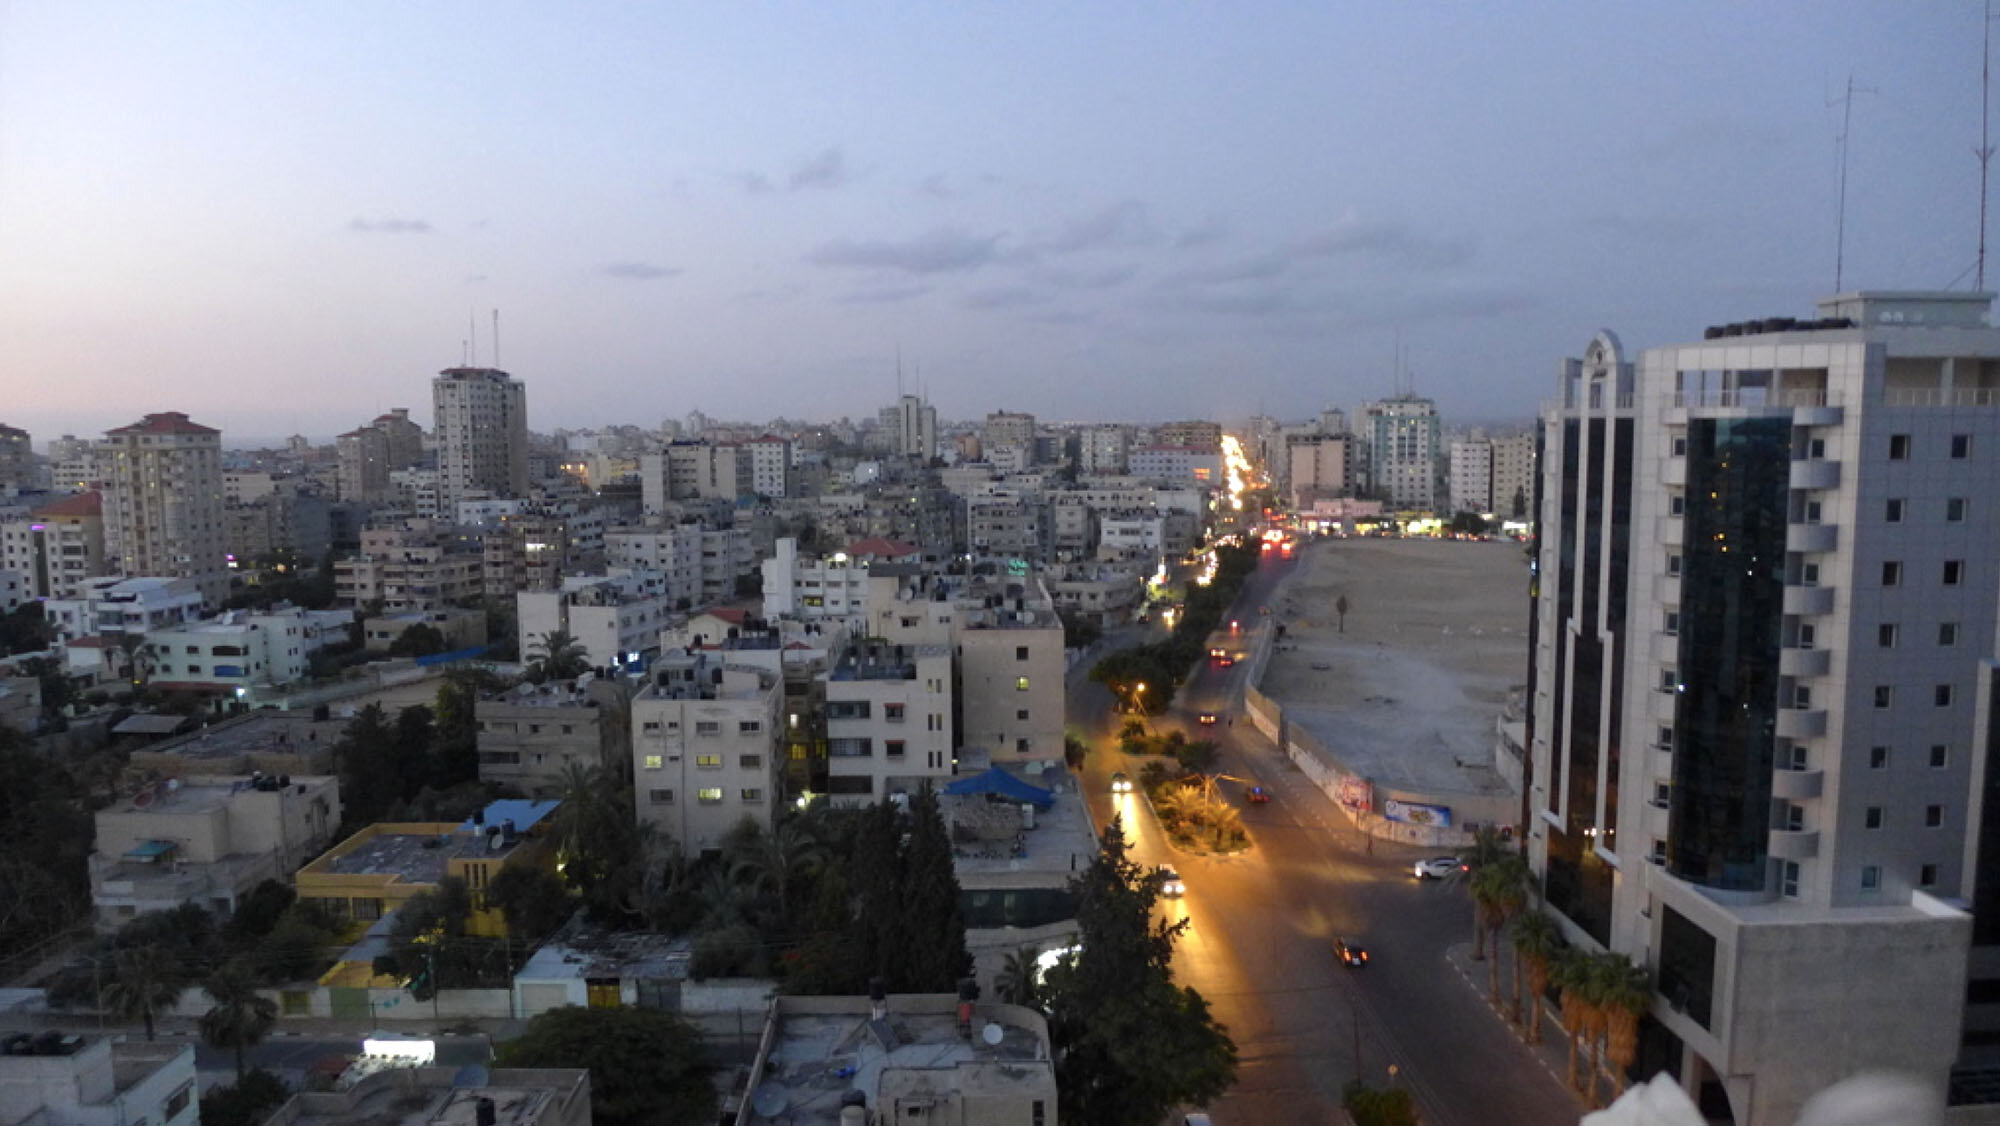 Gaza street viewed from the LAMA production office in Gaza City in 2013 (the building was destroyed in the 2014 war, meanwhile the turquoise building in the background, upper right, is the Al-Jalla building containing the Associated Press and Al-Jazeera offices that was bombed and leveled to the ground in Mai 2021.)